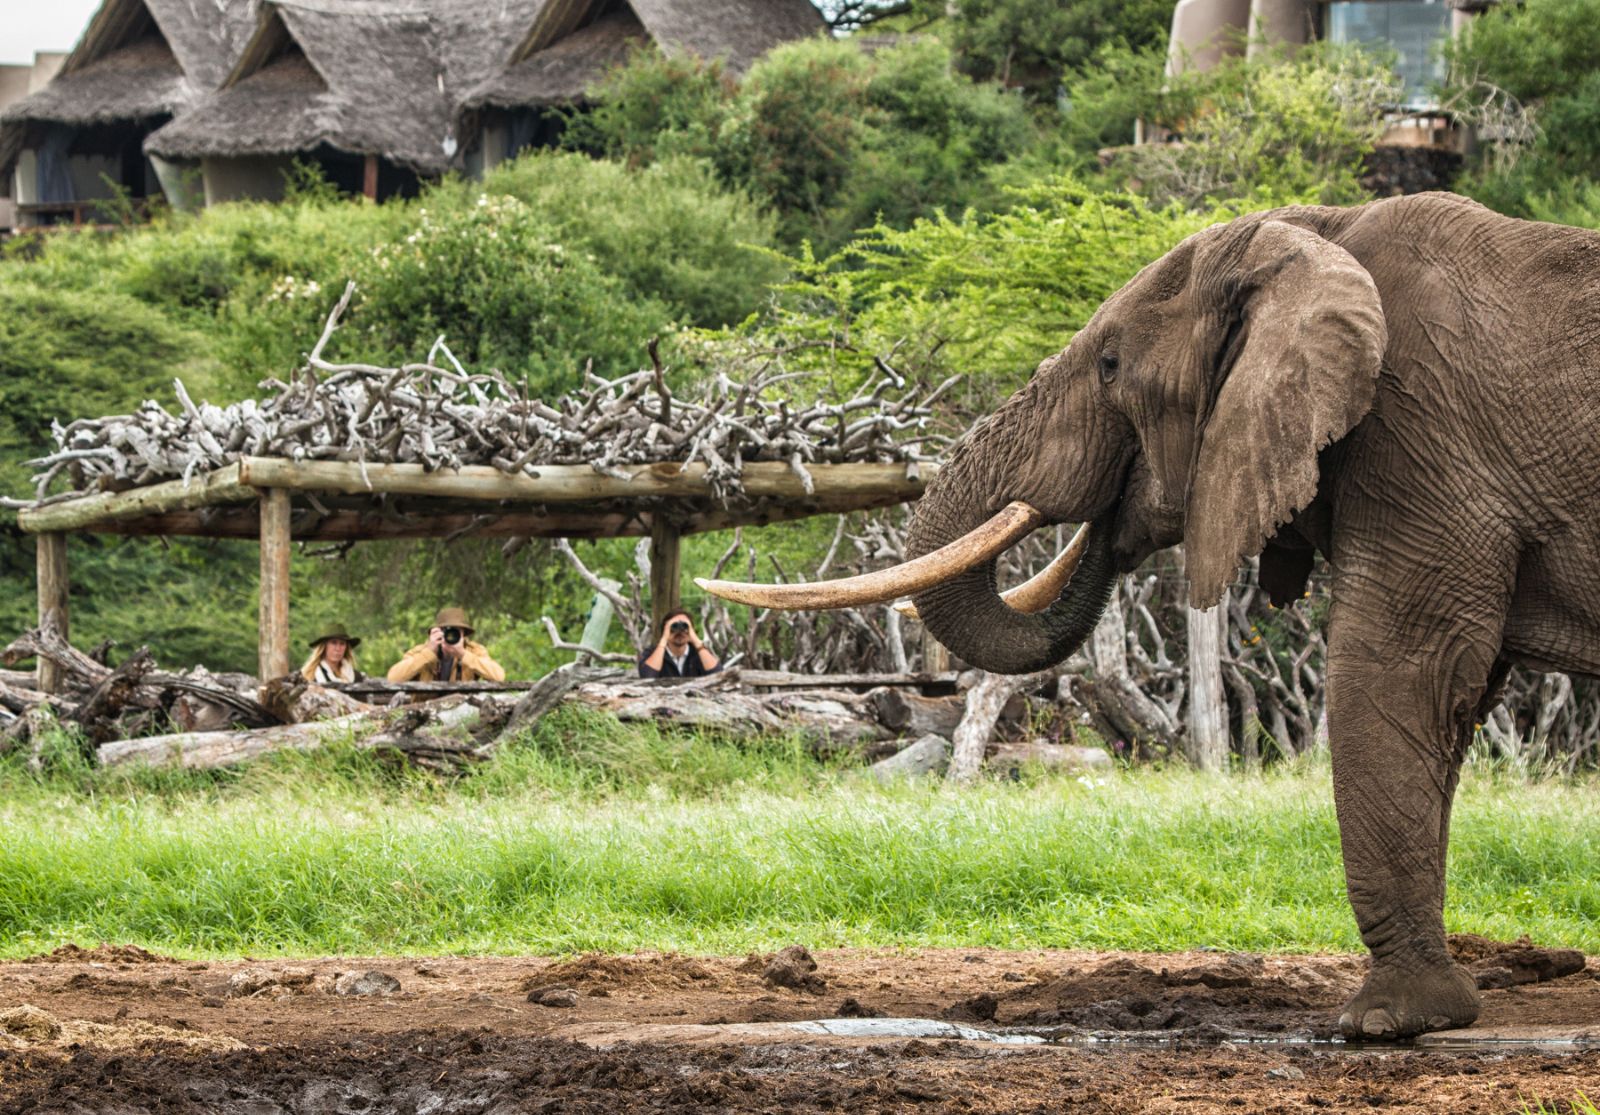 Guests watching an elephant drink from the photographic hide at luxury lodge Ol Donyo in Kenya